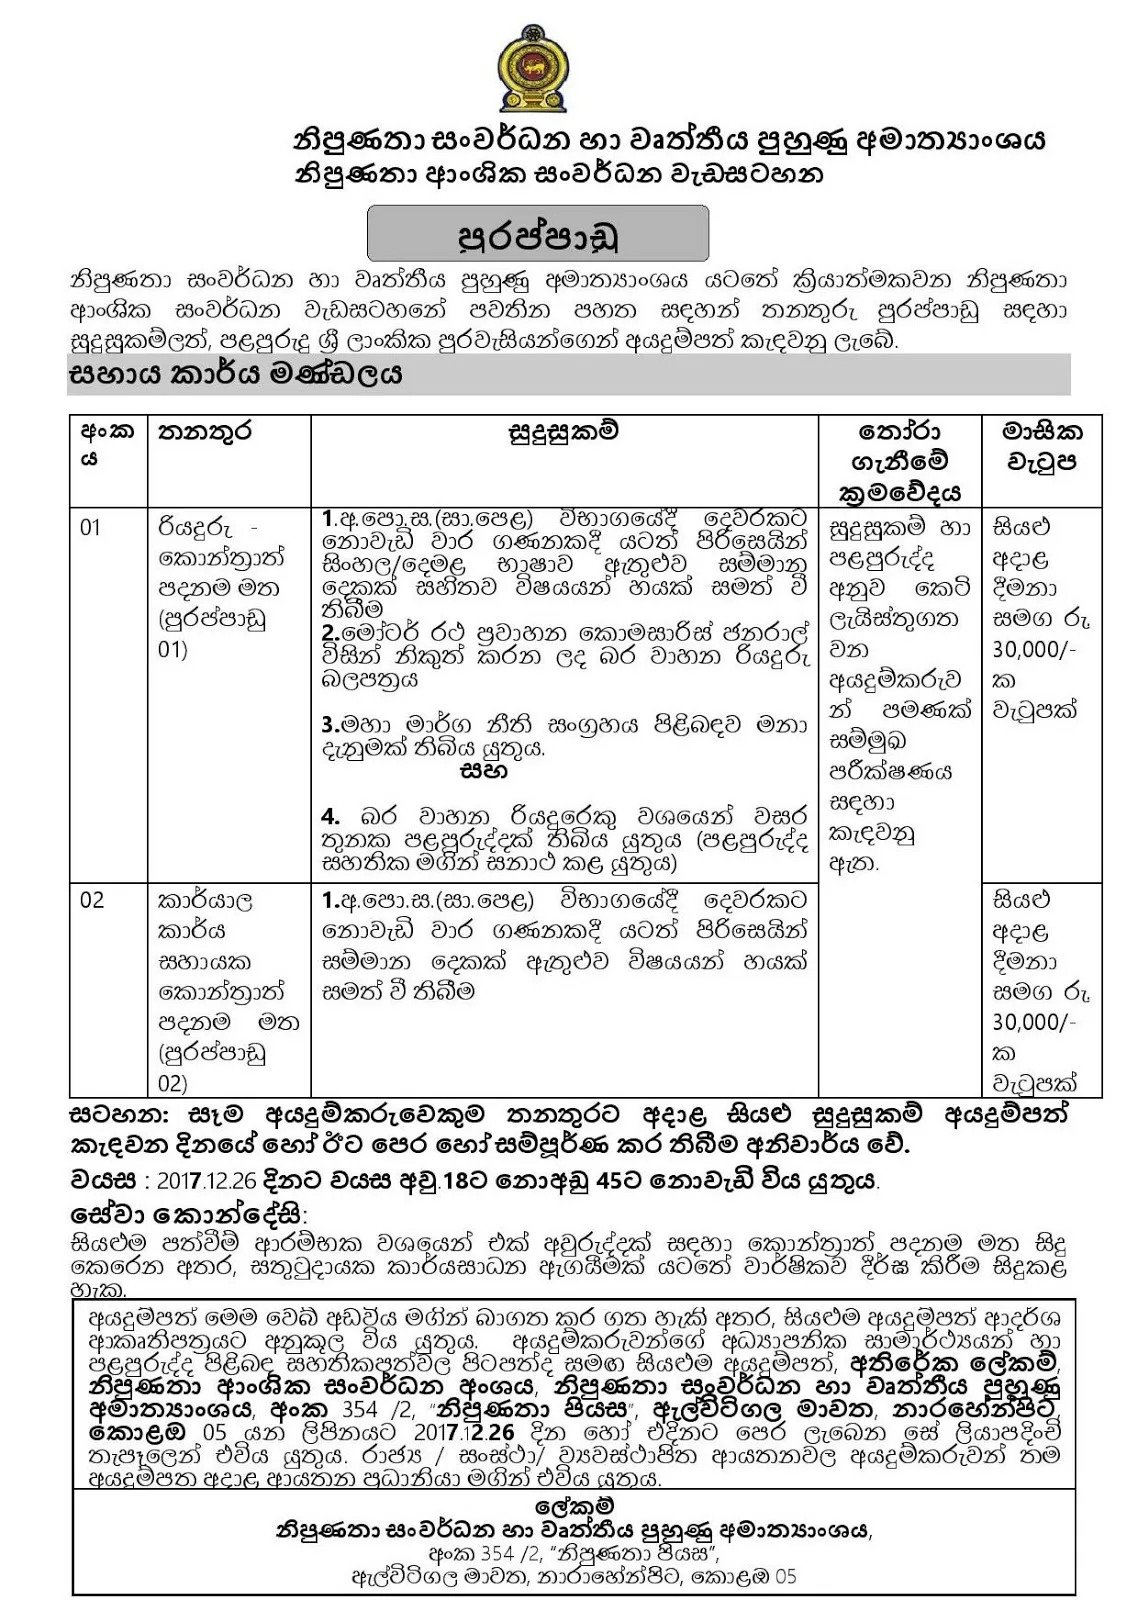 Driver / Office Work Assistant - Ministry of Skills Development & Vocational Training